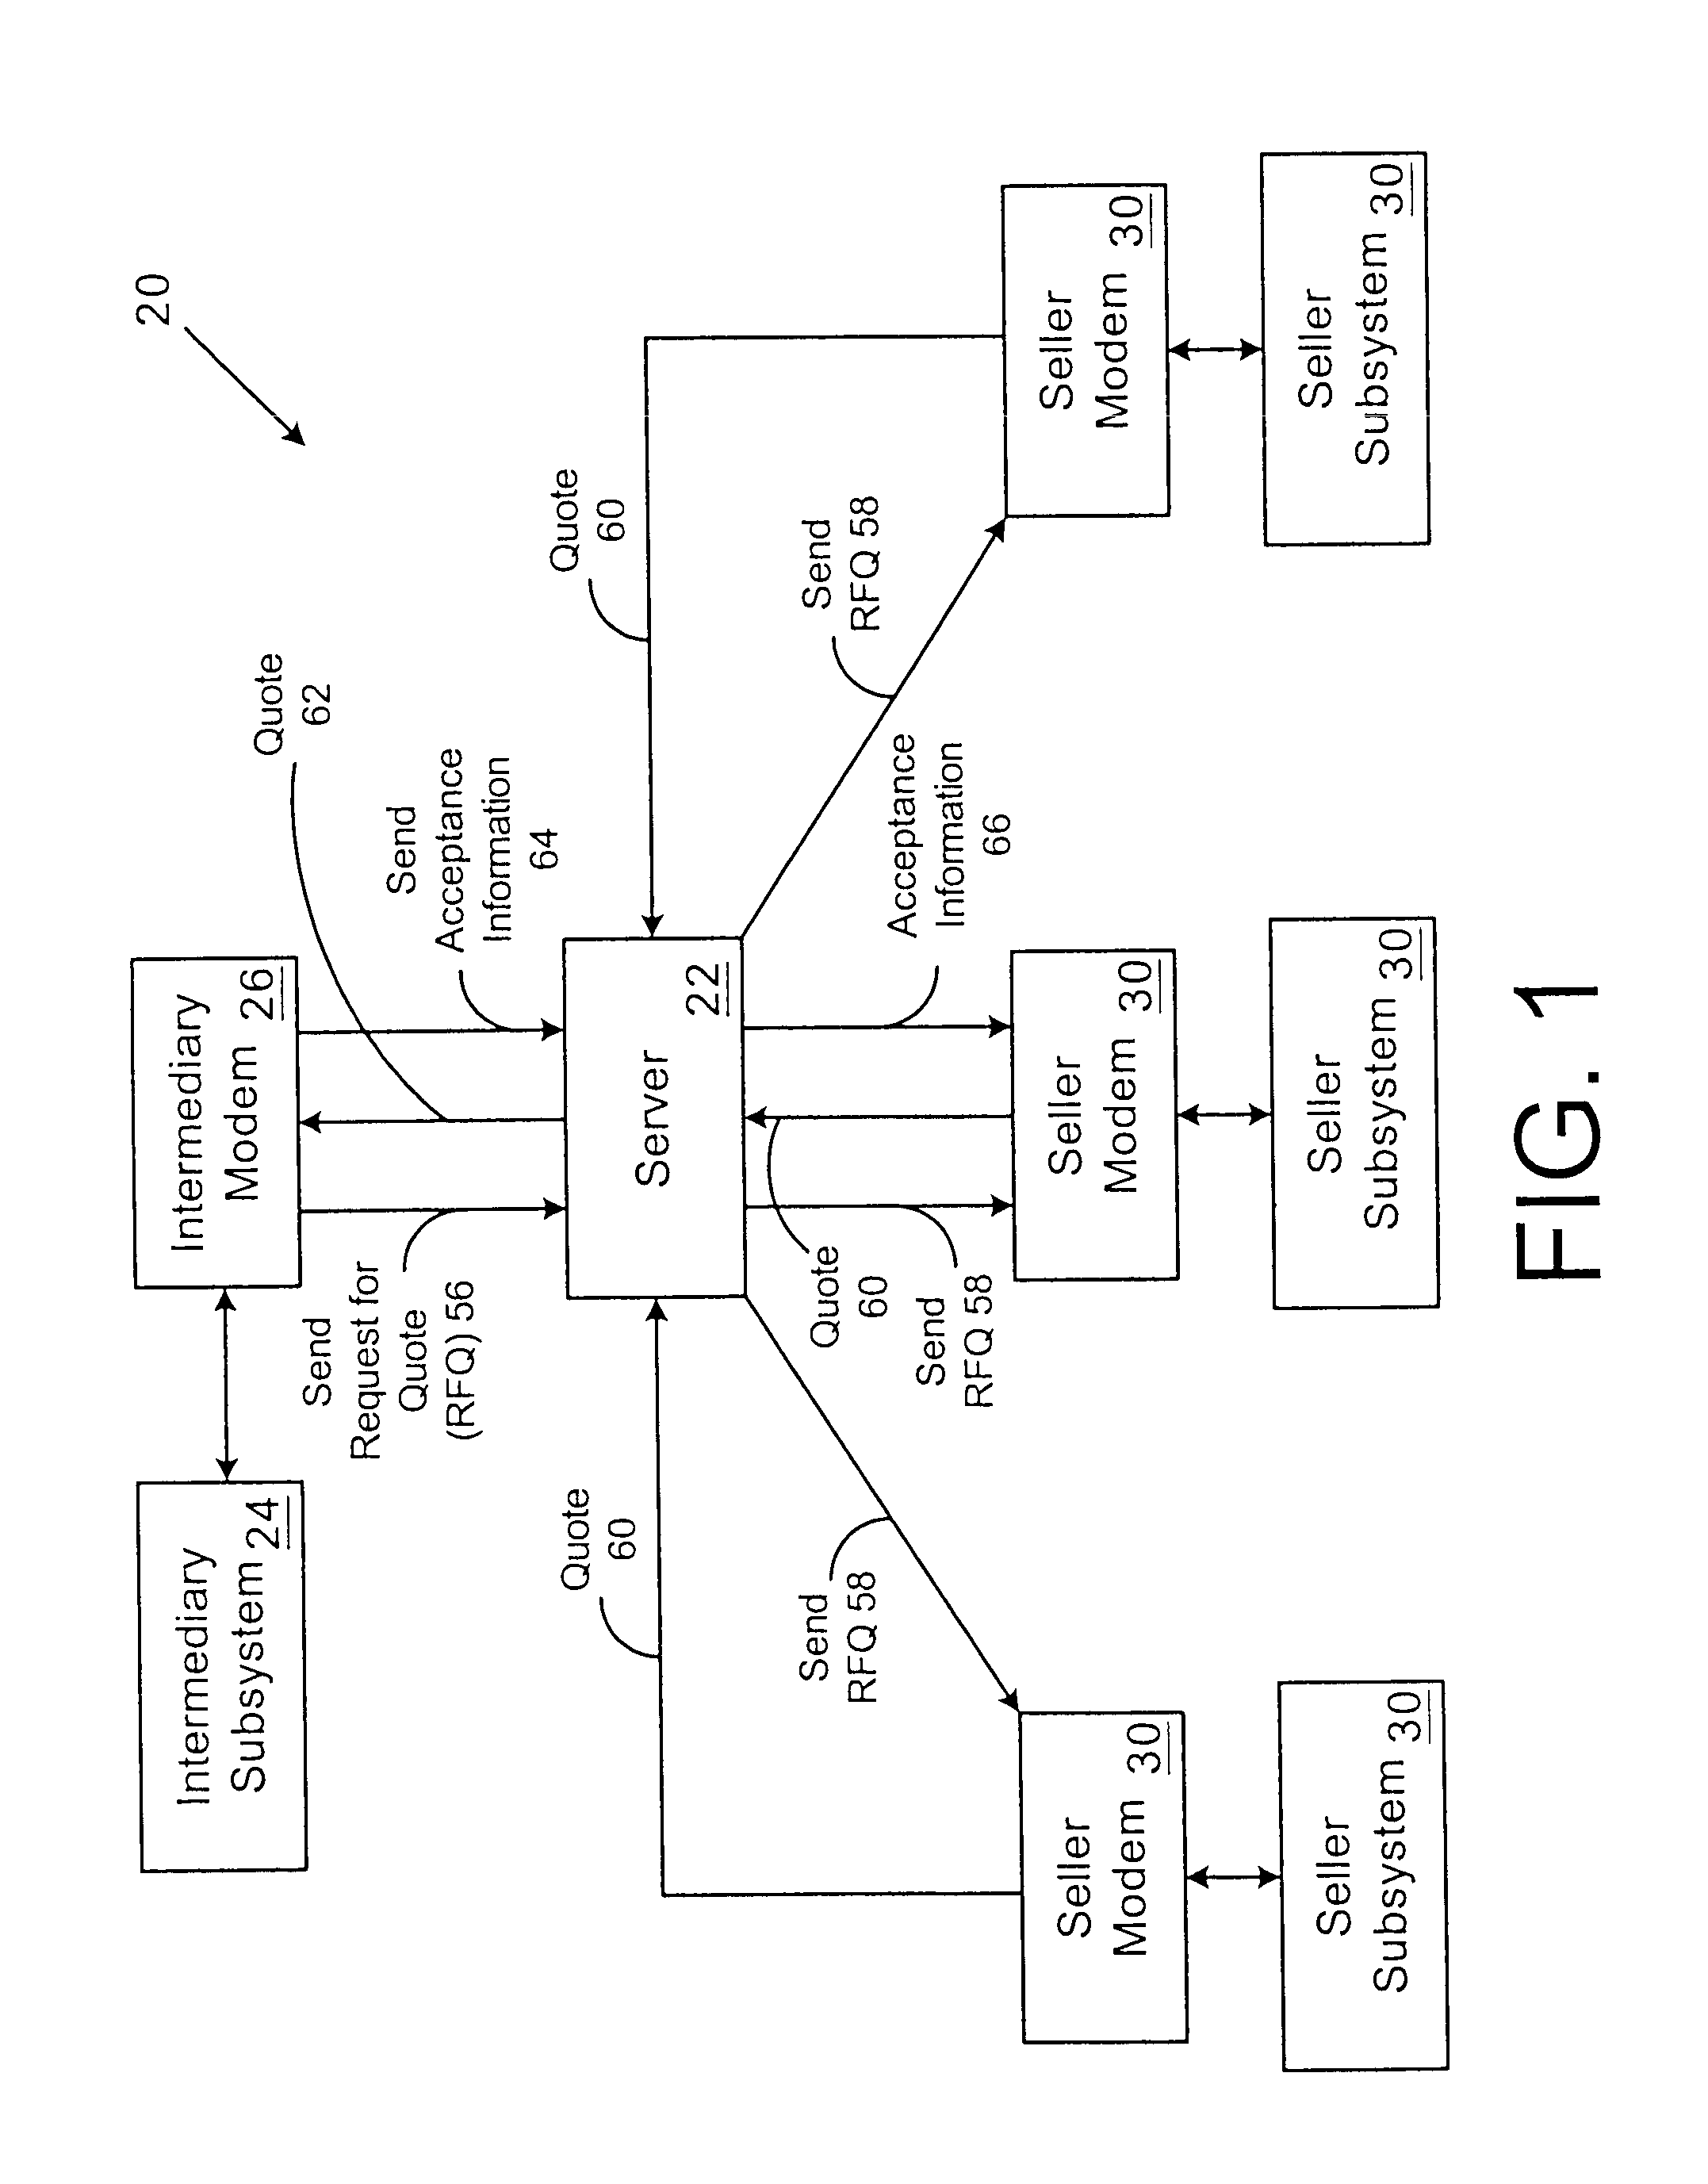 Apparatus and process facilitating customer-driven sales of products having multiple configurations